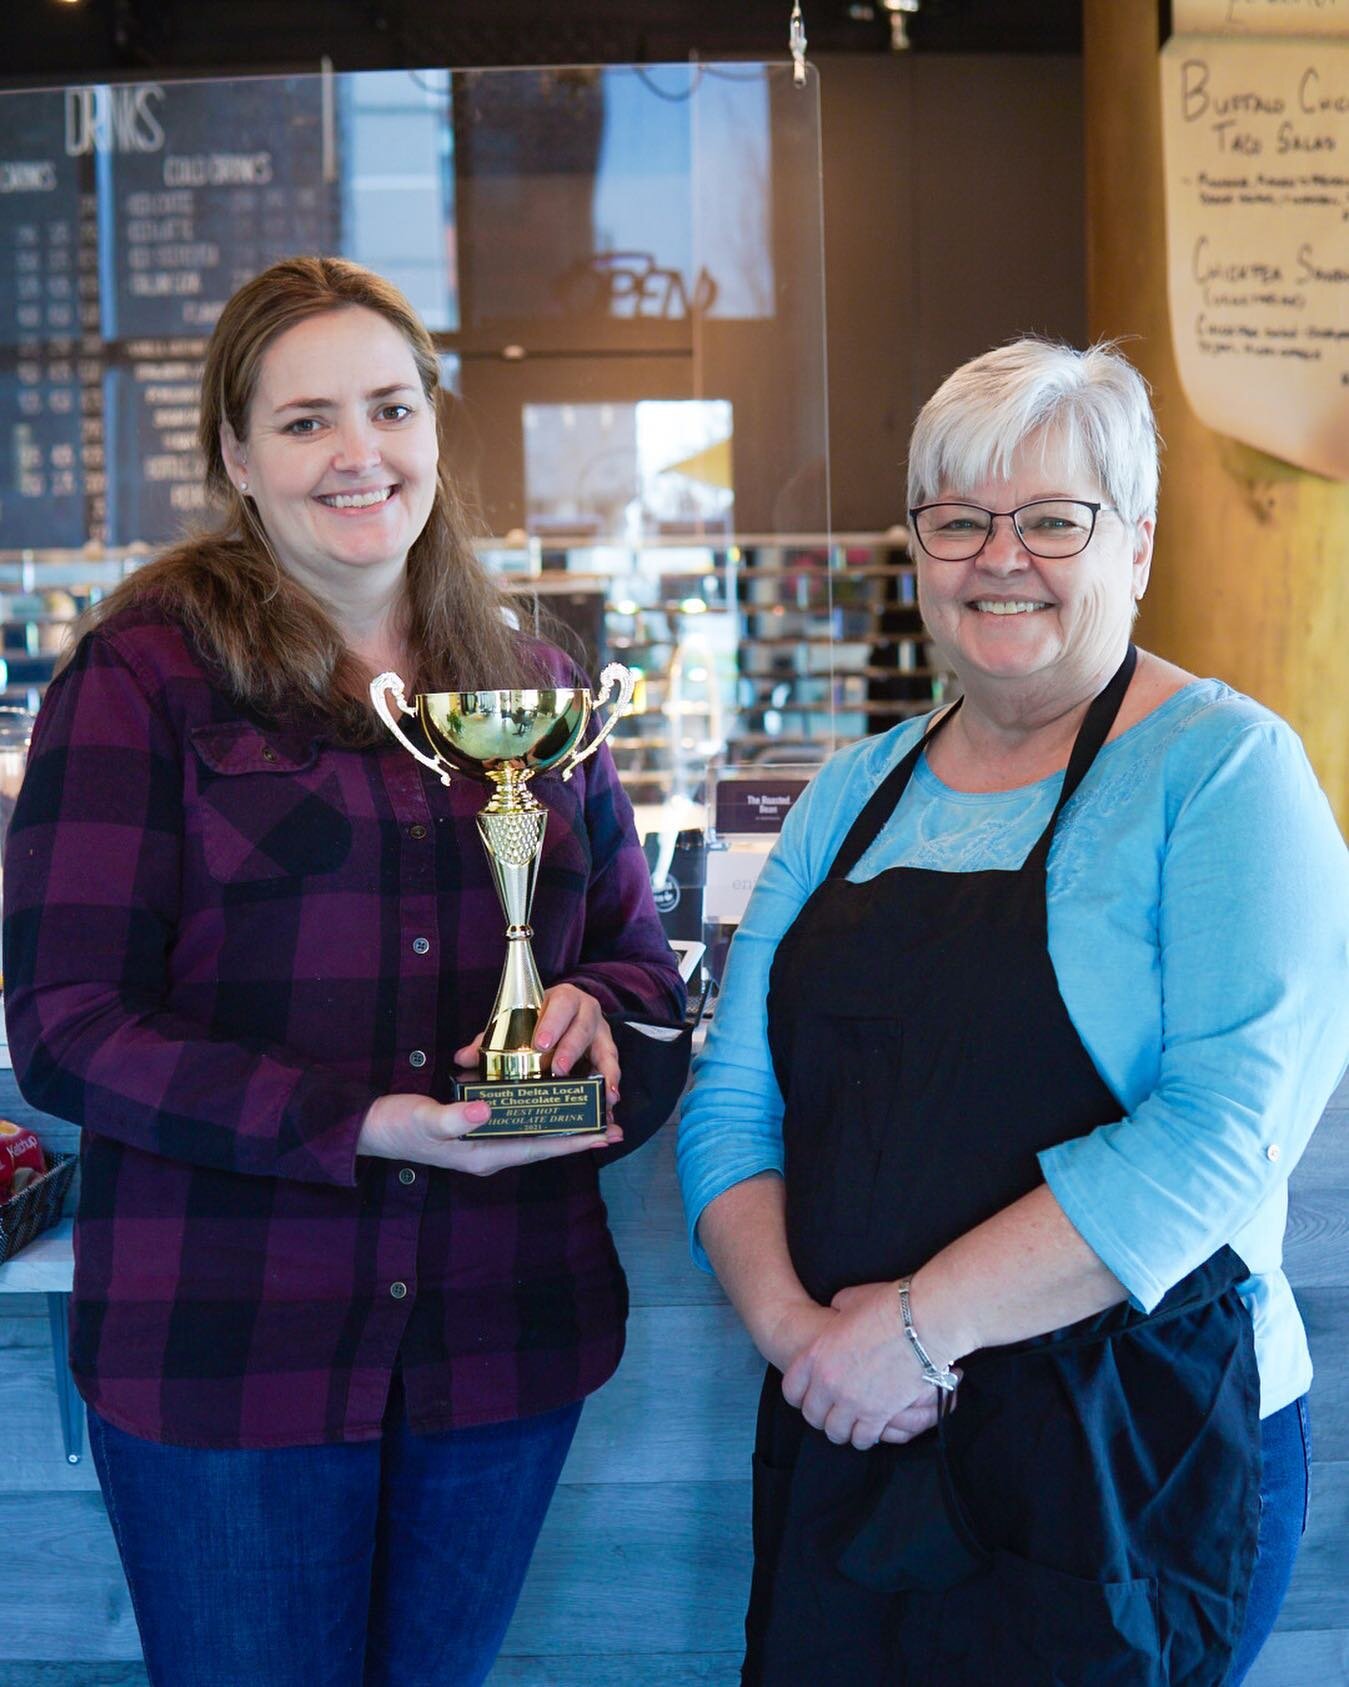 And the Winner of our First South Delta Local Best Hot Chocolate Drink, 2021 is.... Orange Creamsicle Hot Chocolate by @theroastedbeanatnorthgate! Congratulations 🎉 🏆!

Honourable mentions go to @pradocafe @stircoffeehouse and @localzurbancafe!! 

